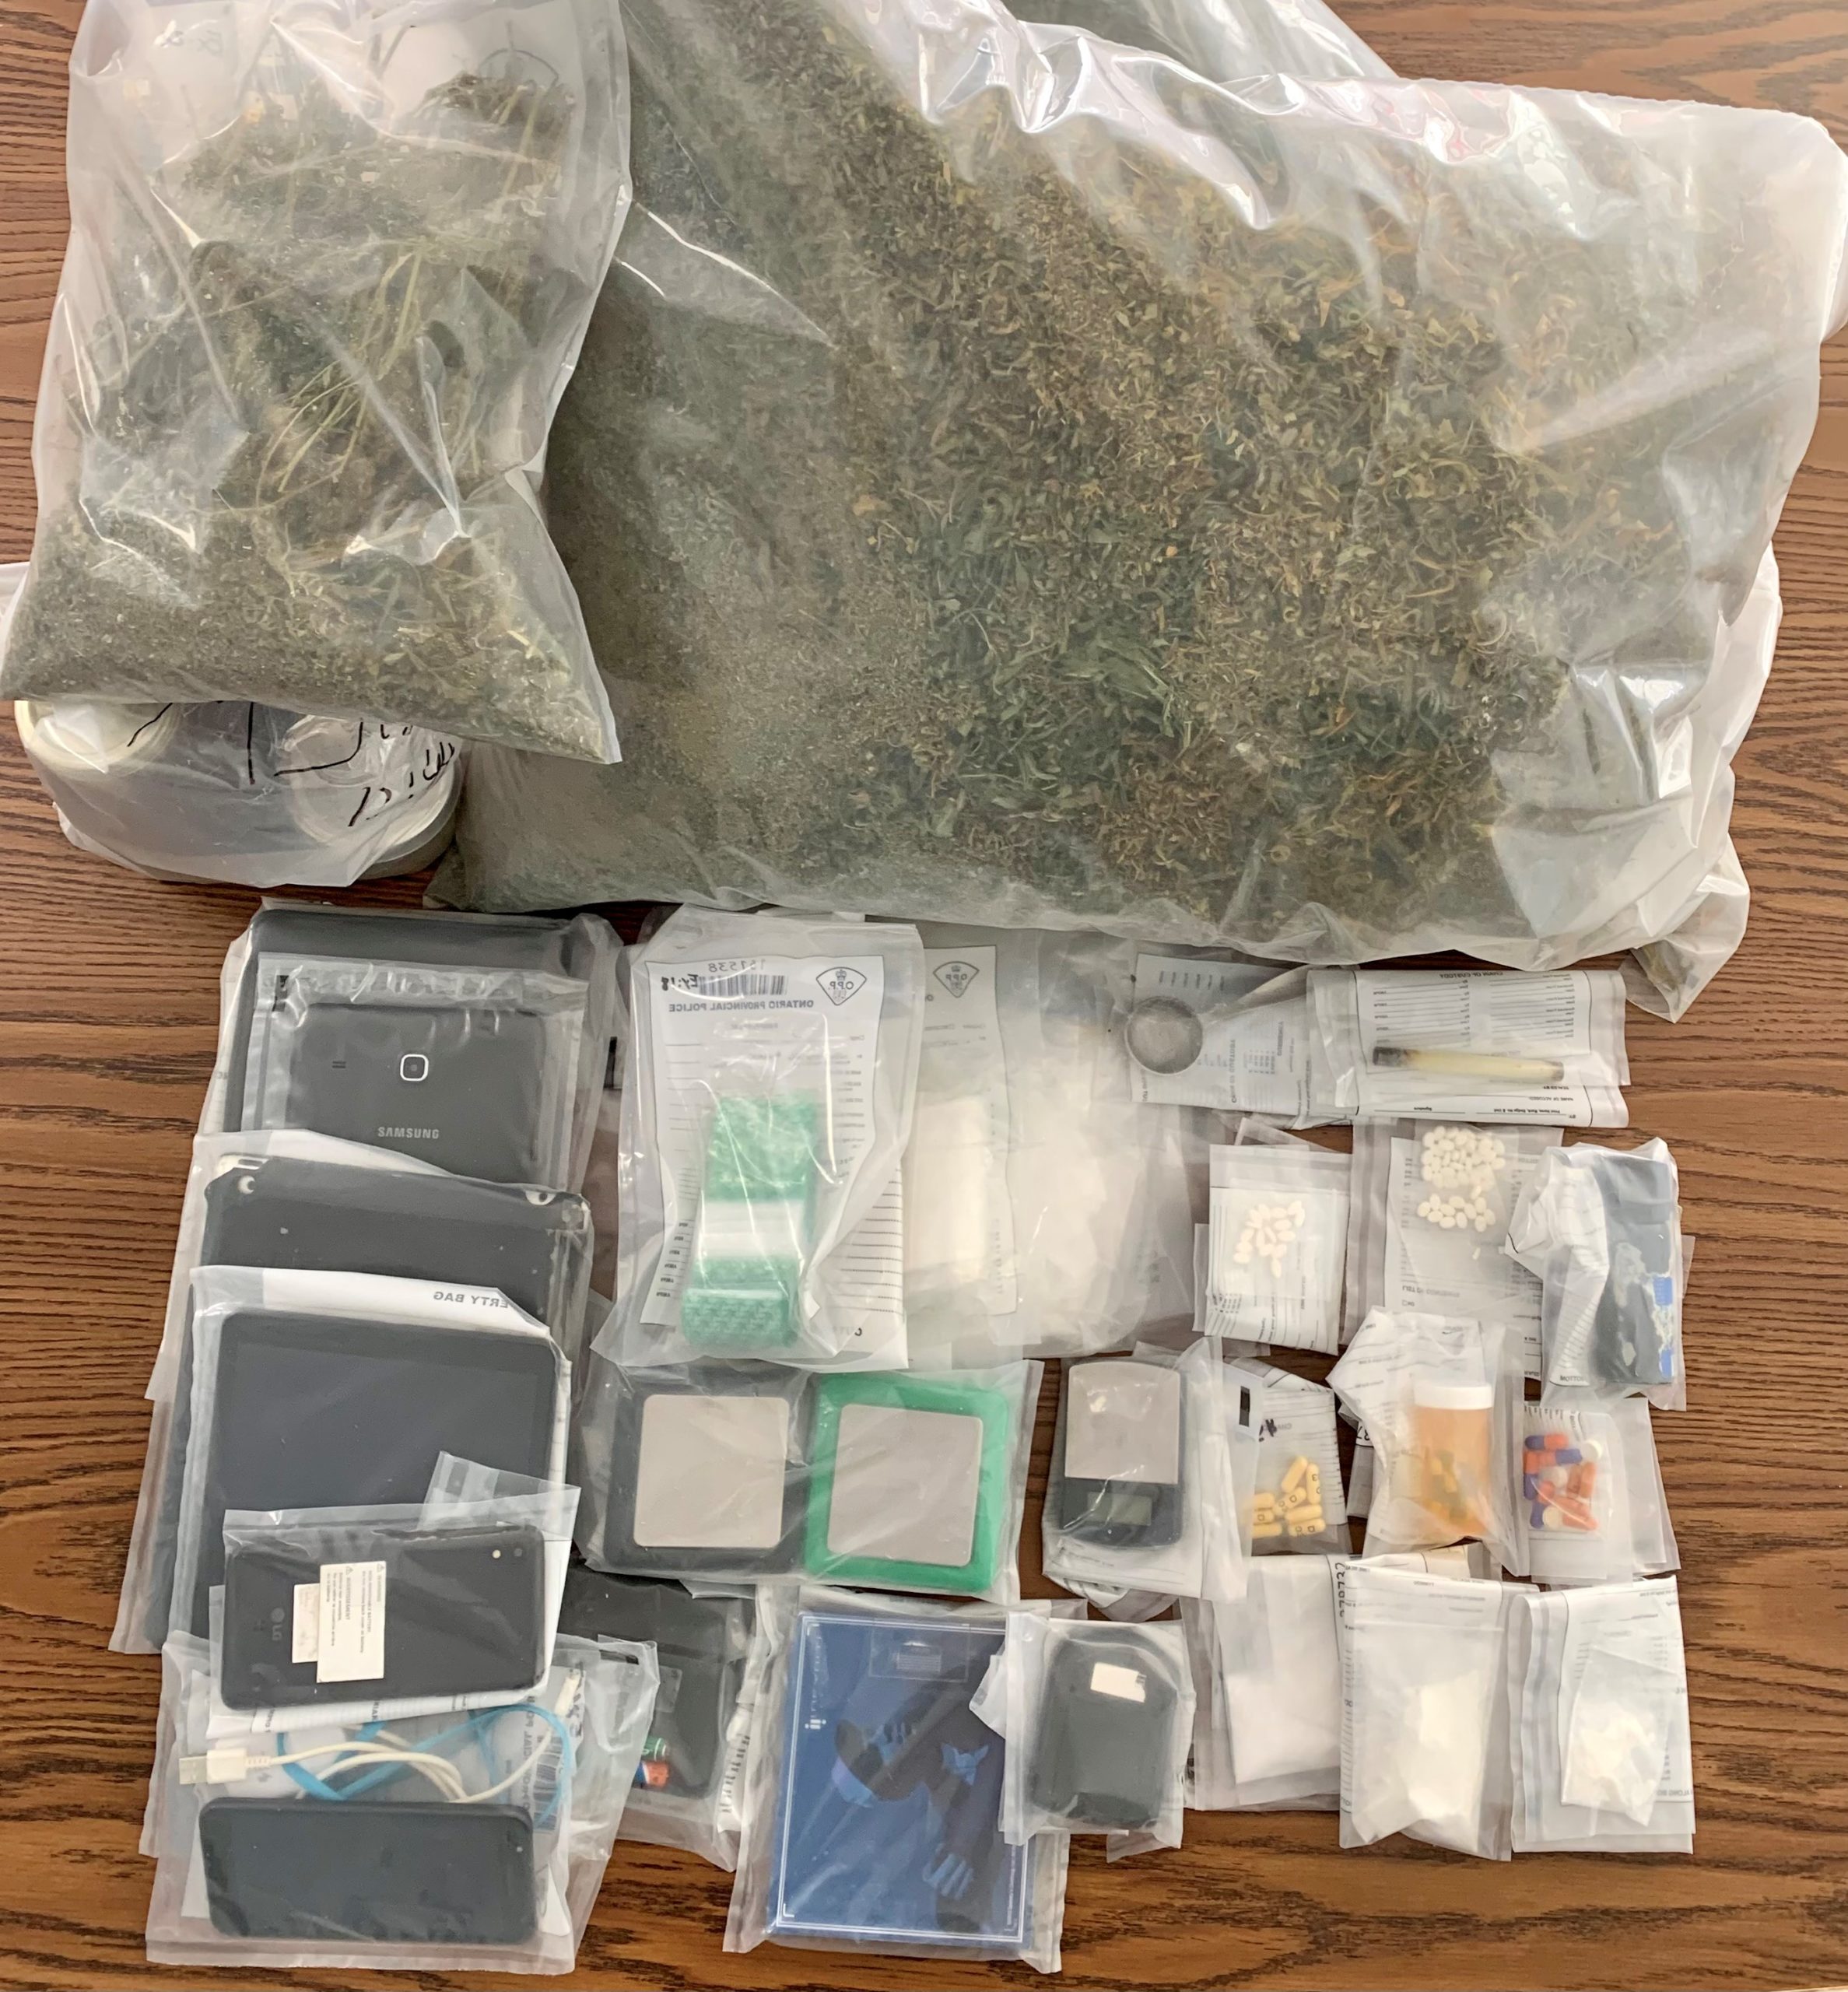 OPP seize drugs and a weapon from Meaford home